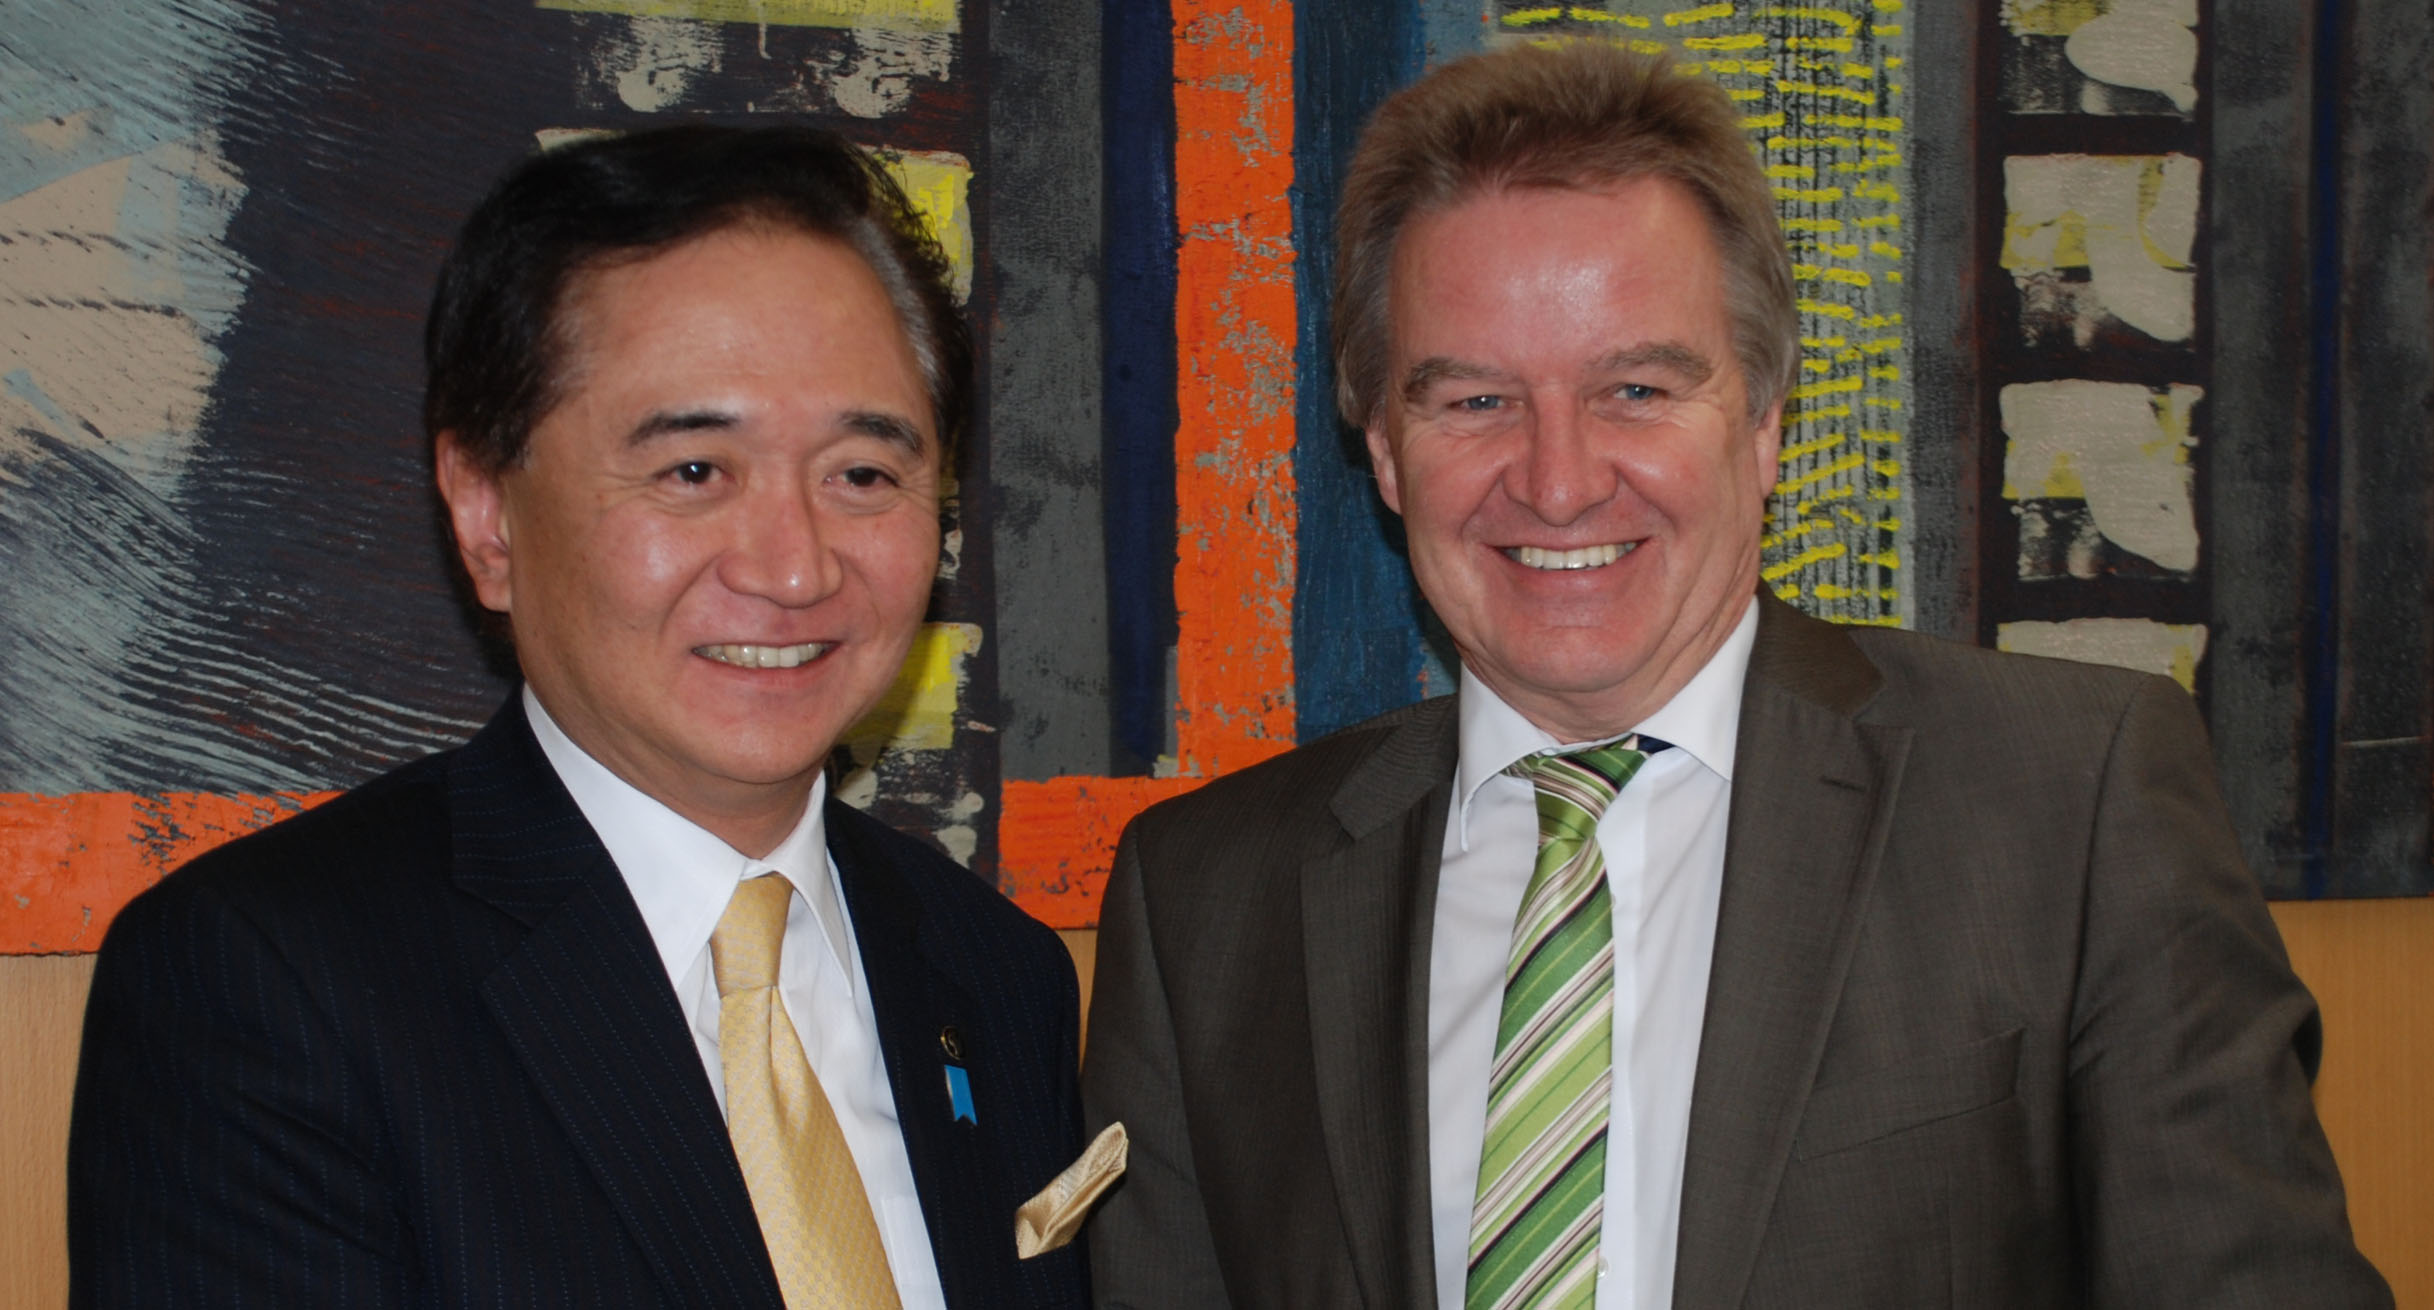 Minister of the Environment Franz Untersteller (right) and Governor Yūji Kuroiwa agreed on closer cooperation in the fields of renewable energy, energy efficiency and e-mobility.']